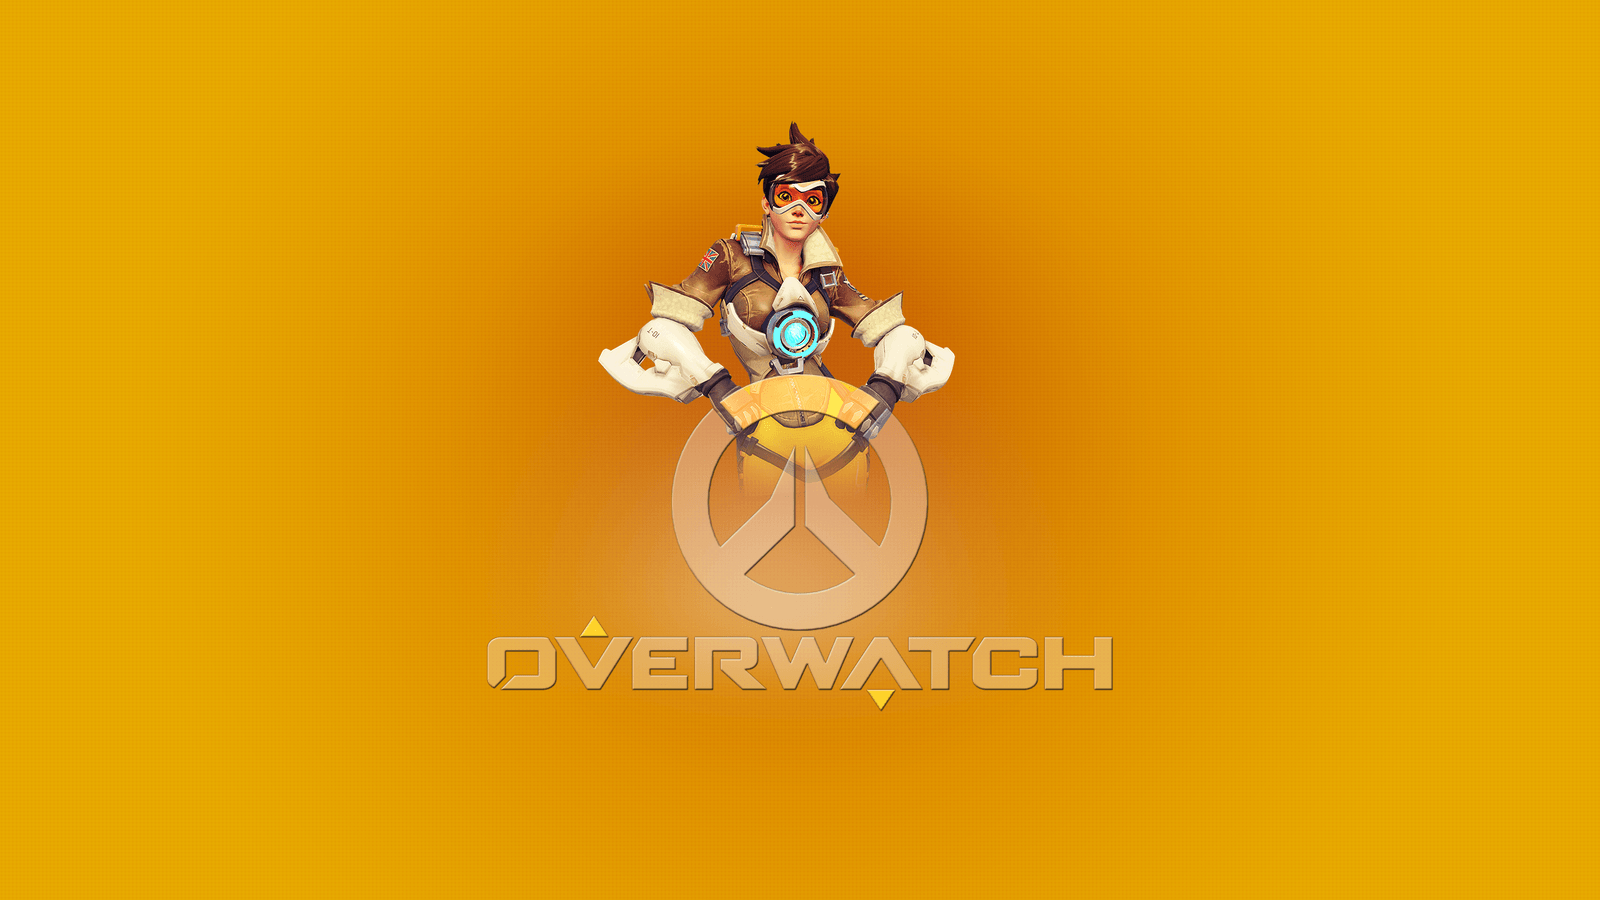 More Like Overwatch Tracer Wallpaper x 1080